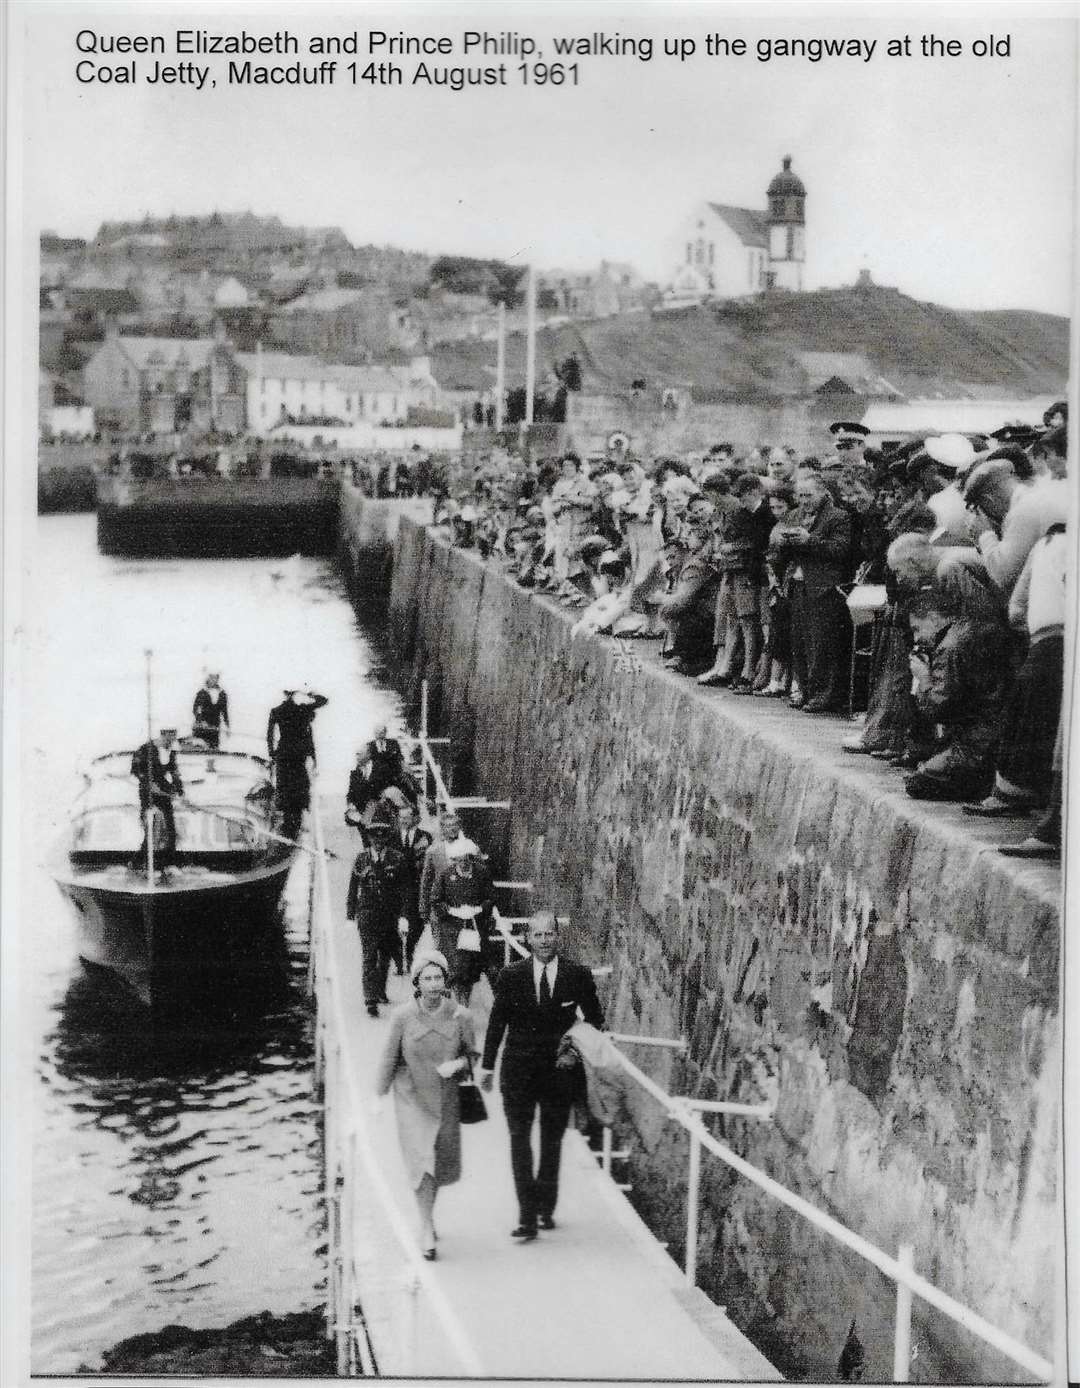 The Queen and the Duke of Edinburgh at Macduff Harbour.